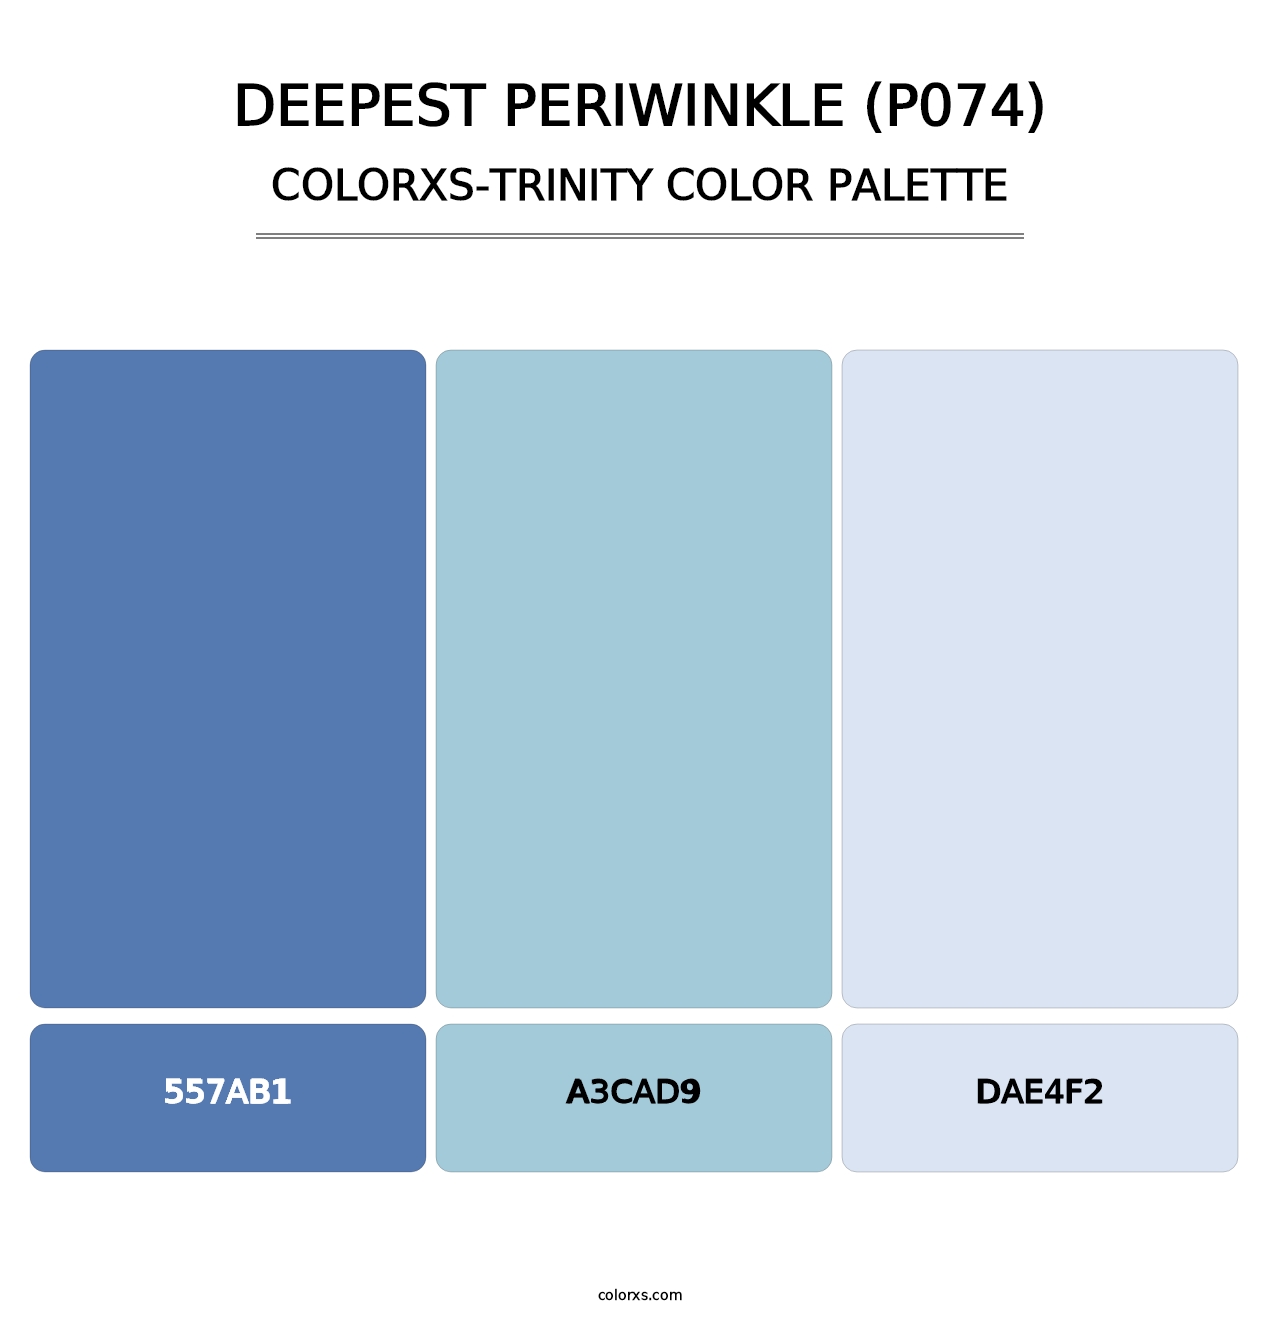 Deepest Periwinkle (P074) - Colorxs Trinity Palette